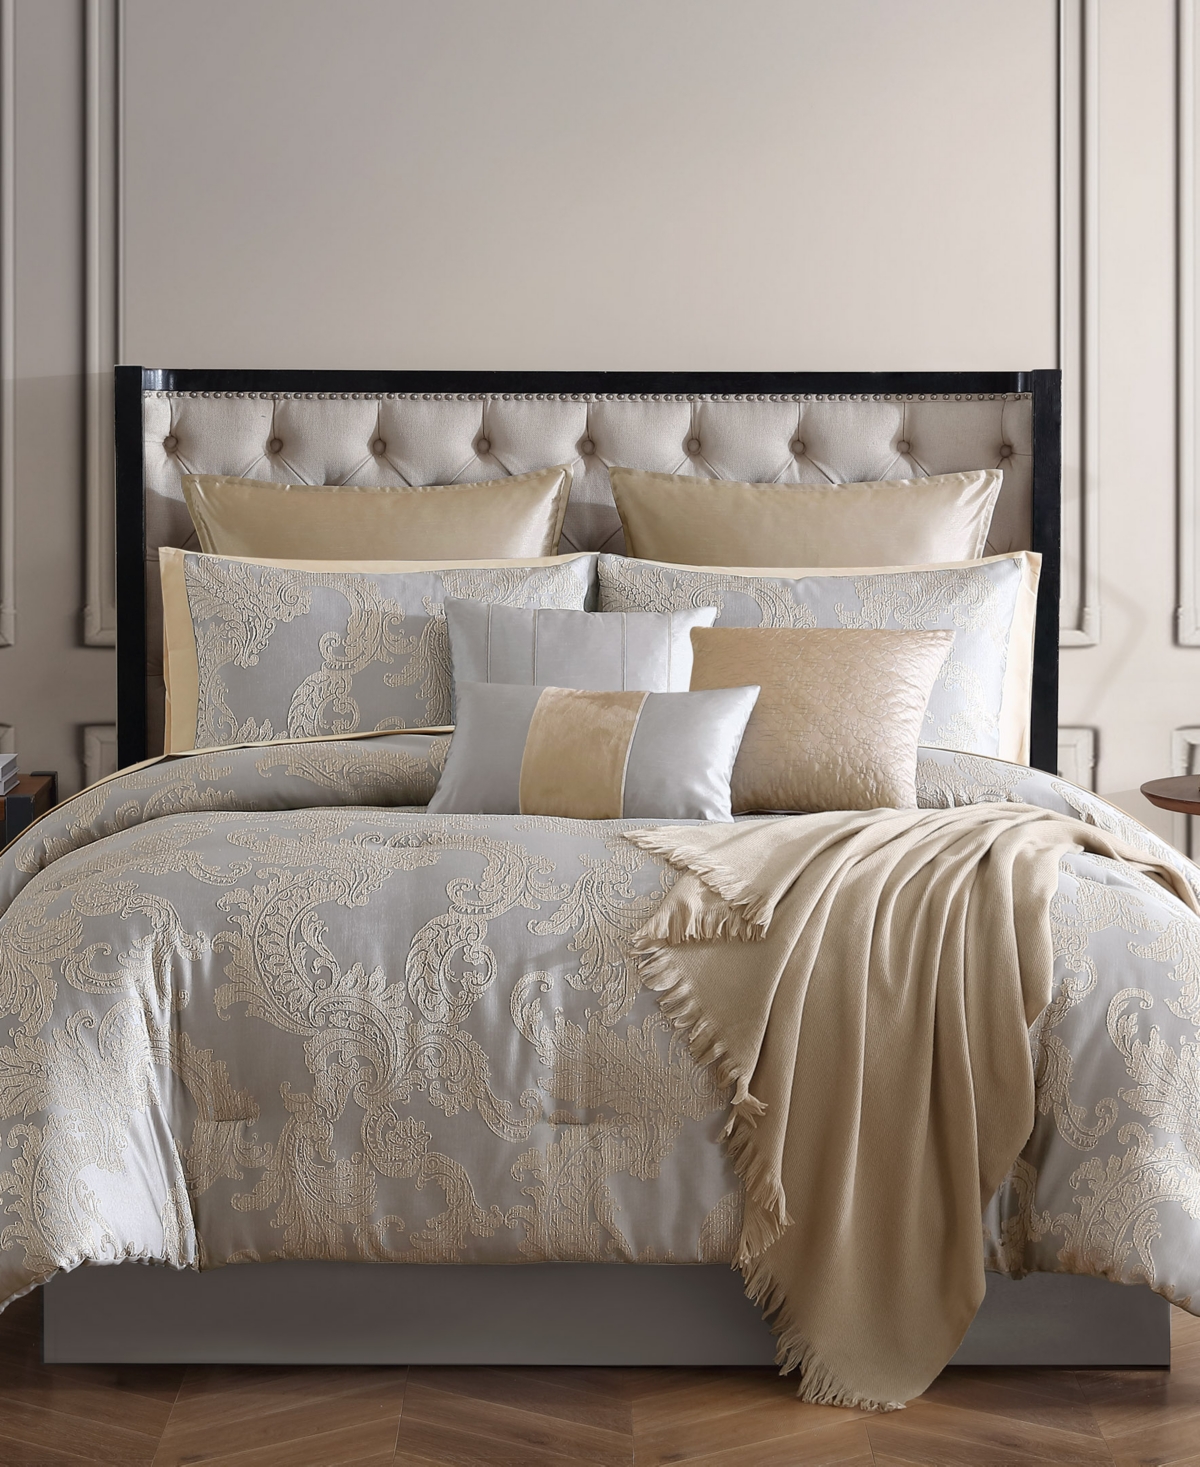 Hallmart Collectibles Olivia 14-pc Comforter Set, Queen, Created For Macy's In Neutral